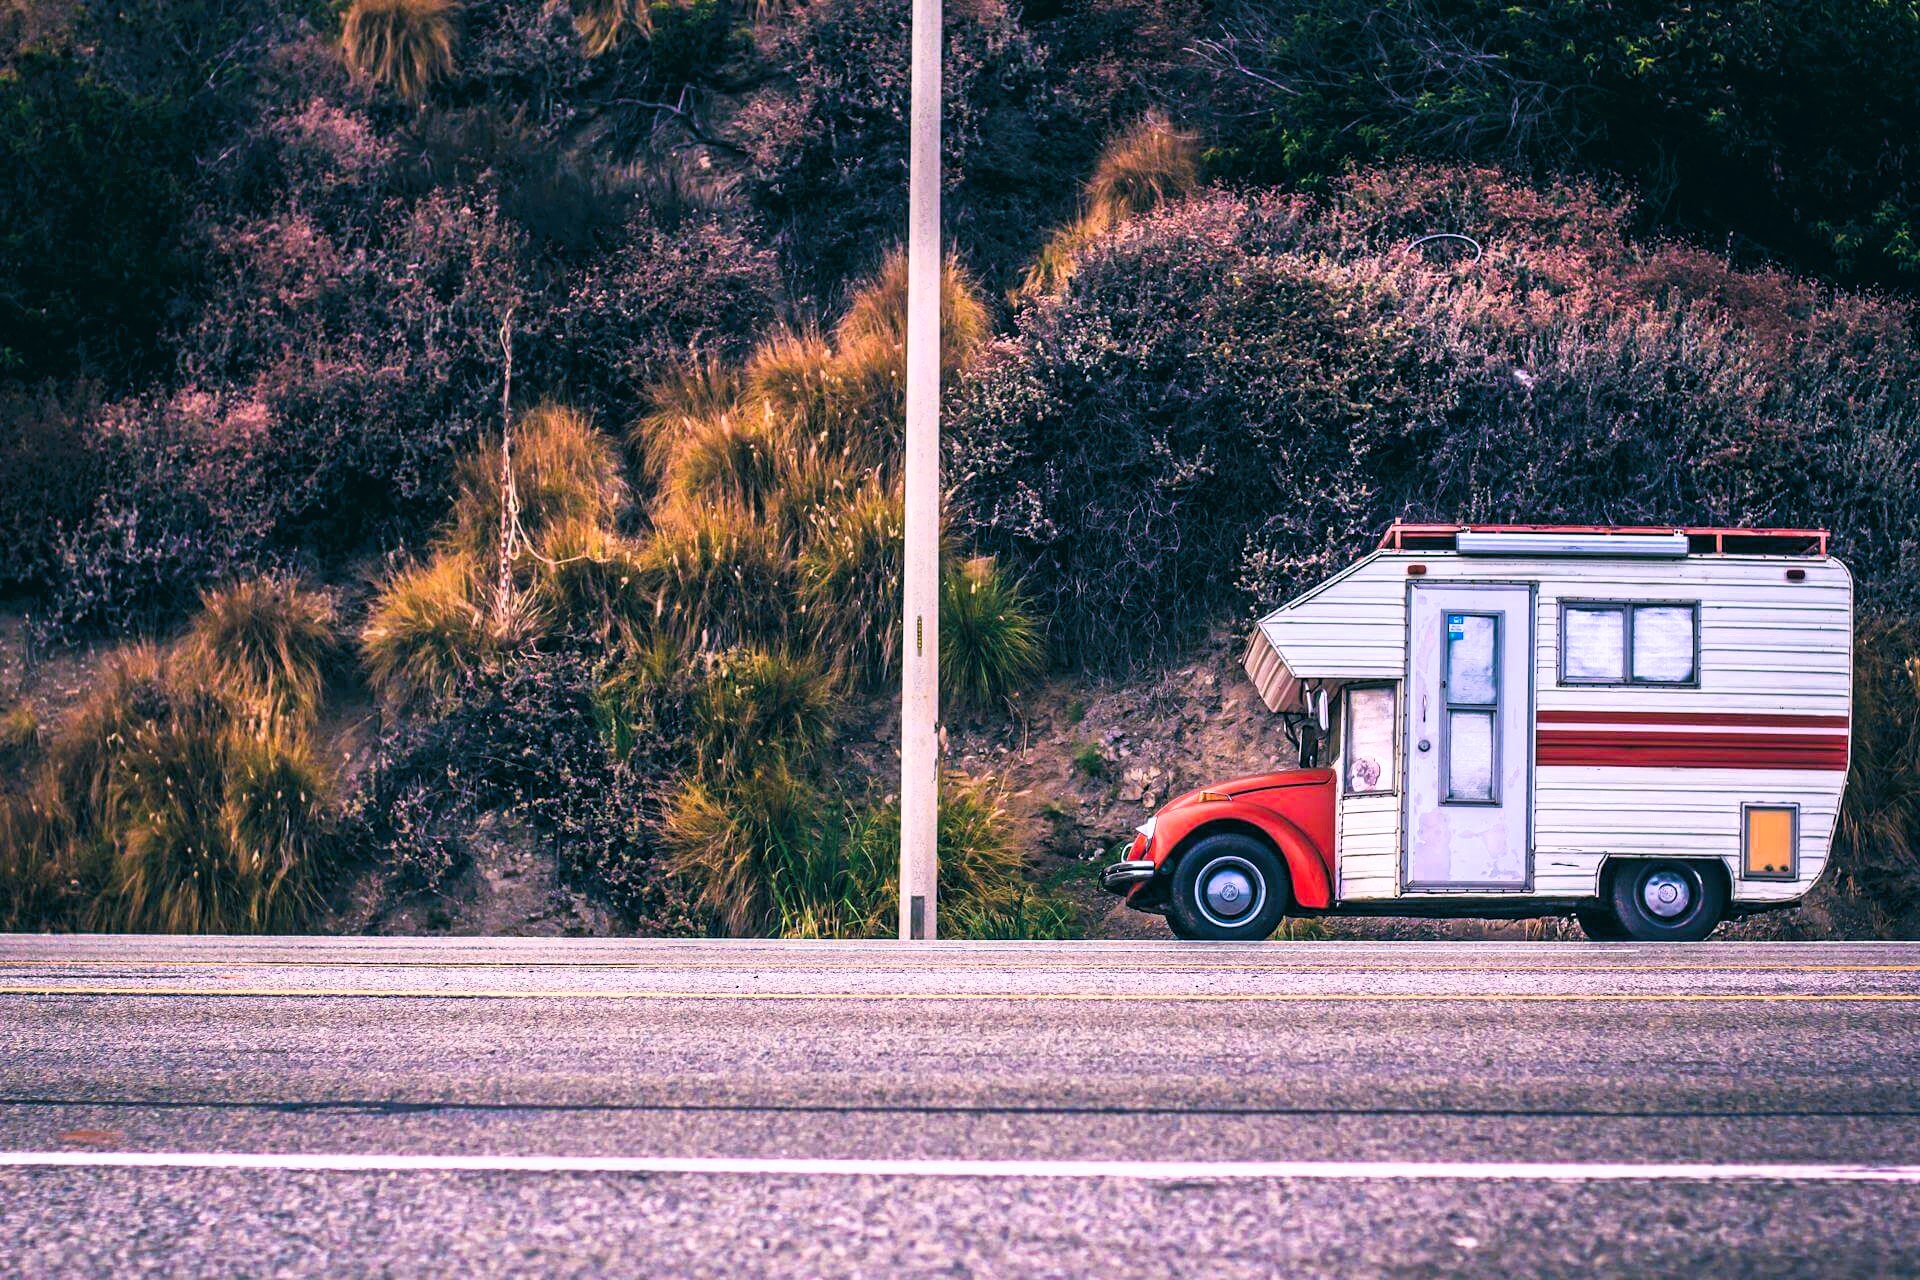 Small campervan made from VW Beetle on the side of the highway